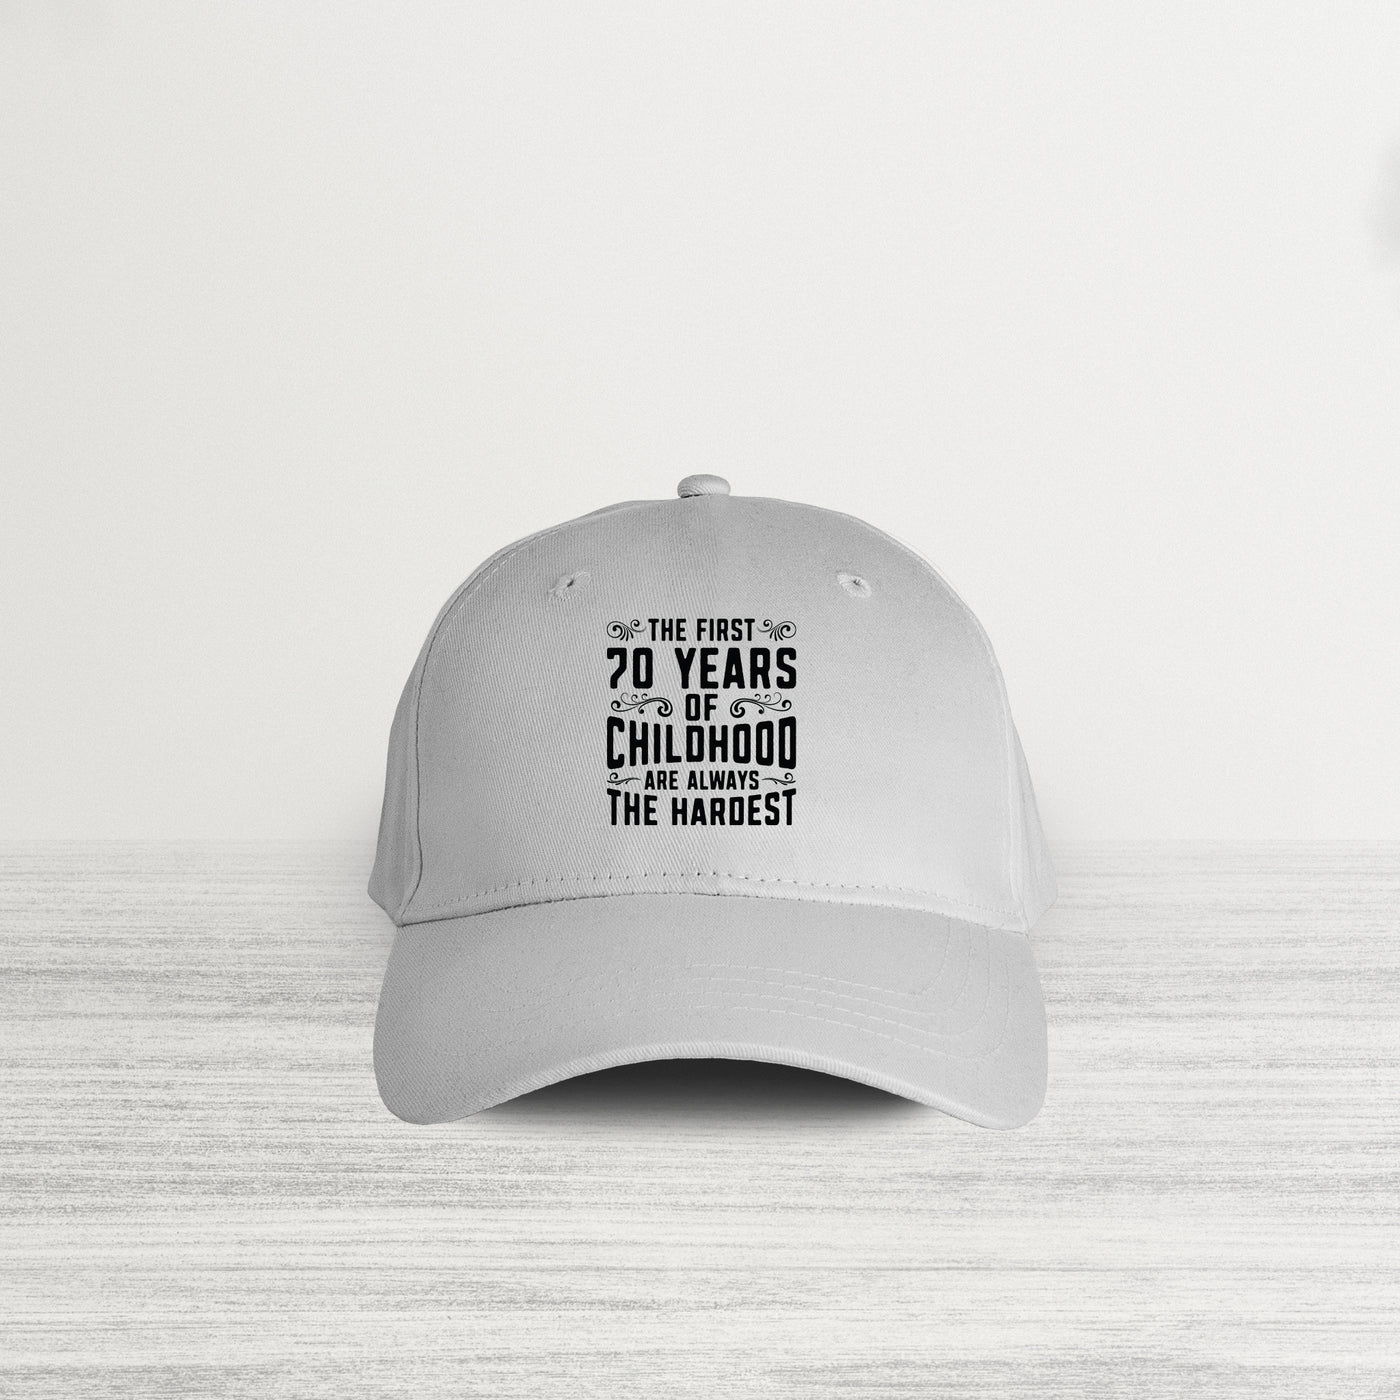 The First 70 Years HAT